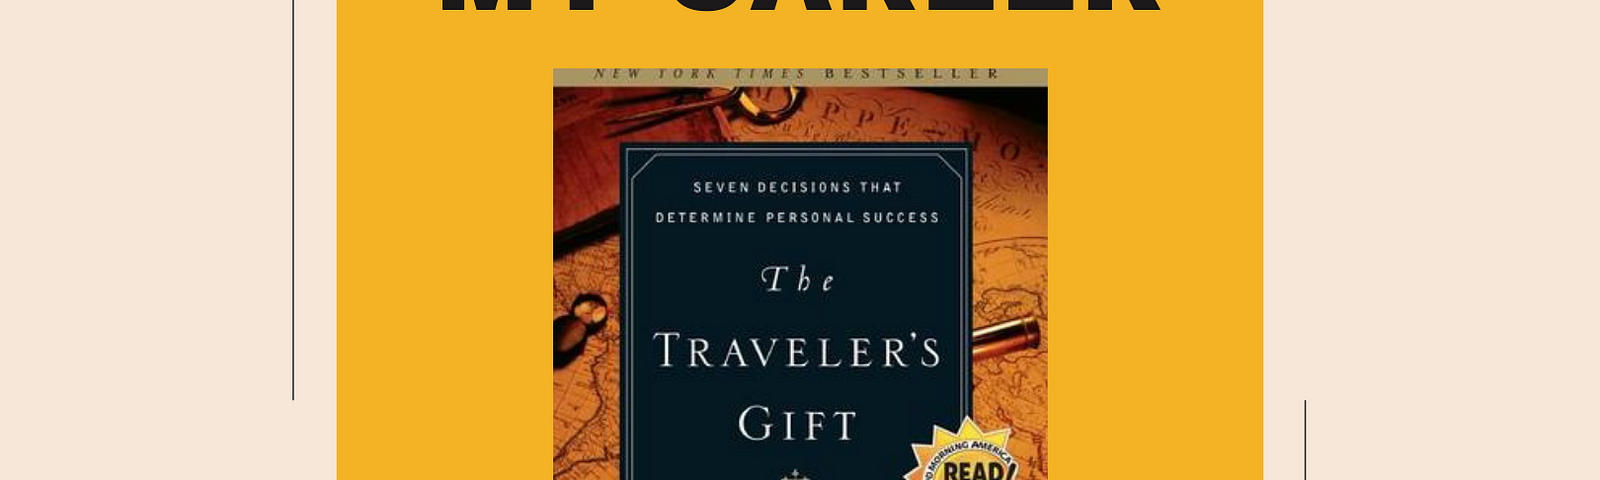 Image of the cover of the The Traveler’s Gift: Seven Decisions that Determine Personal Success on top of two yellow squares. The additional text reads “The worst Required reading of my career — the traveler’s gift” The traveler’s gift is the worst leadership book that I have been forced to read by a company.